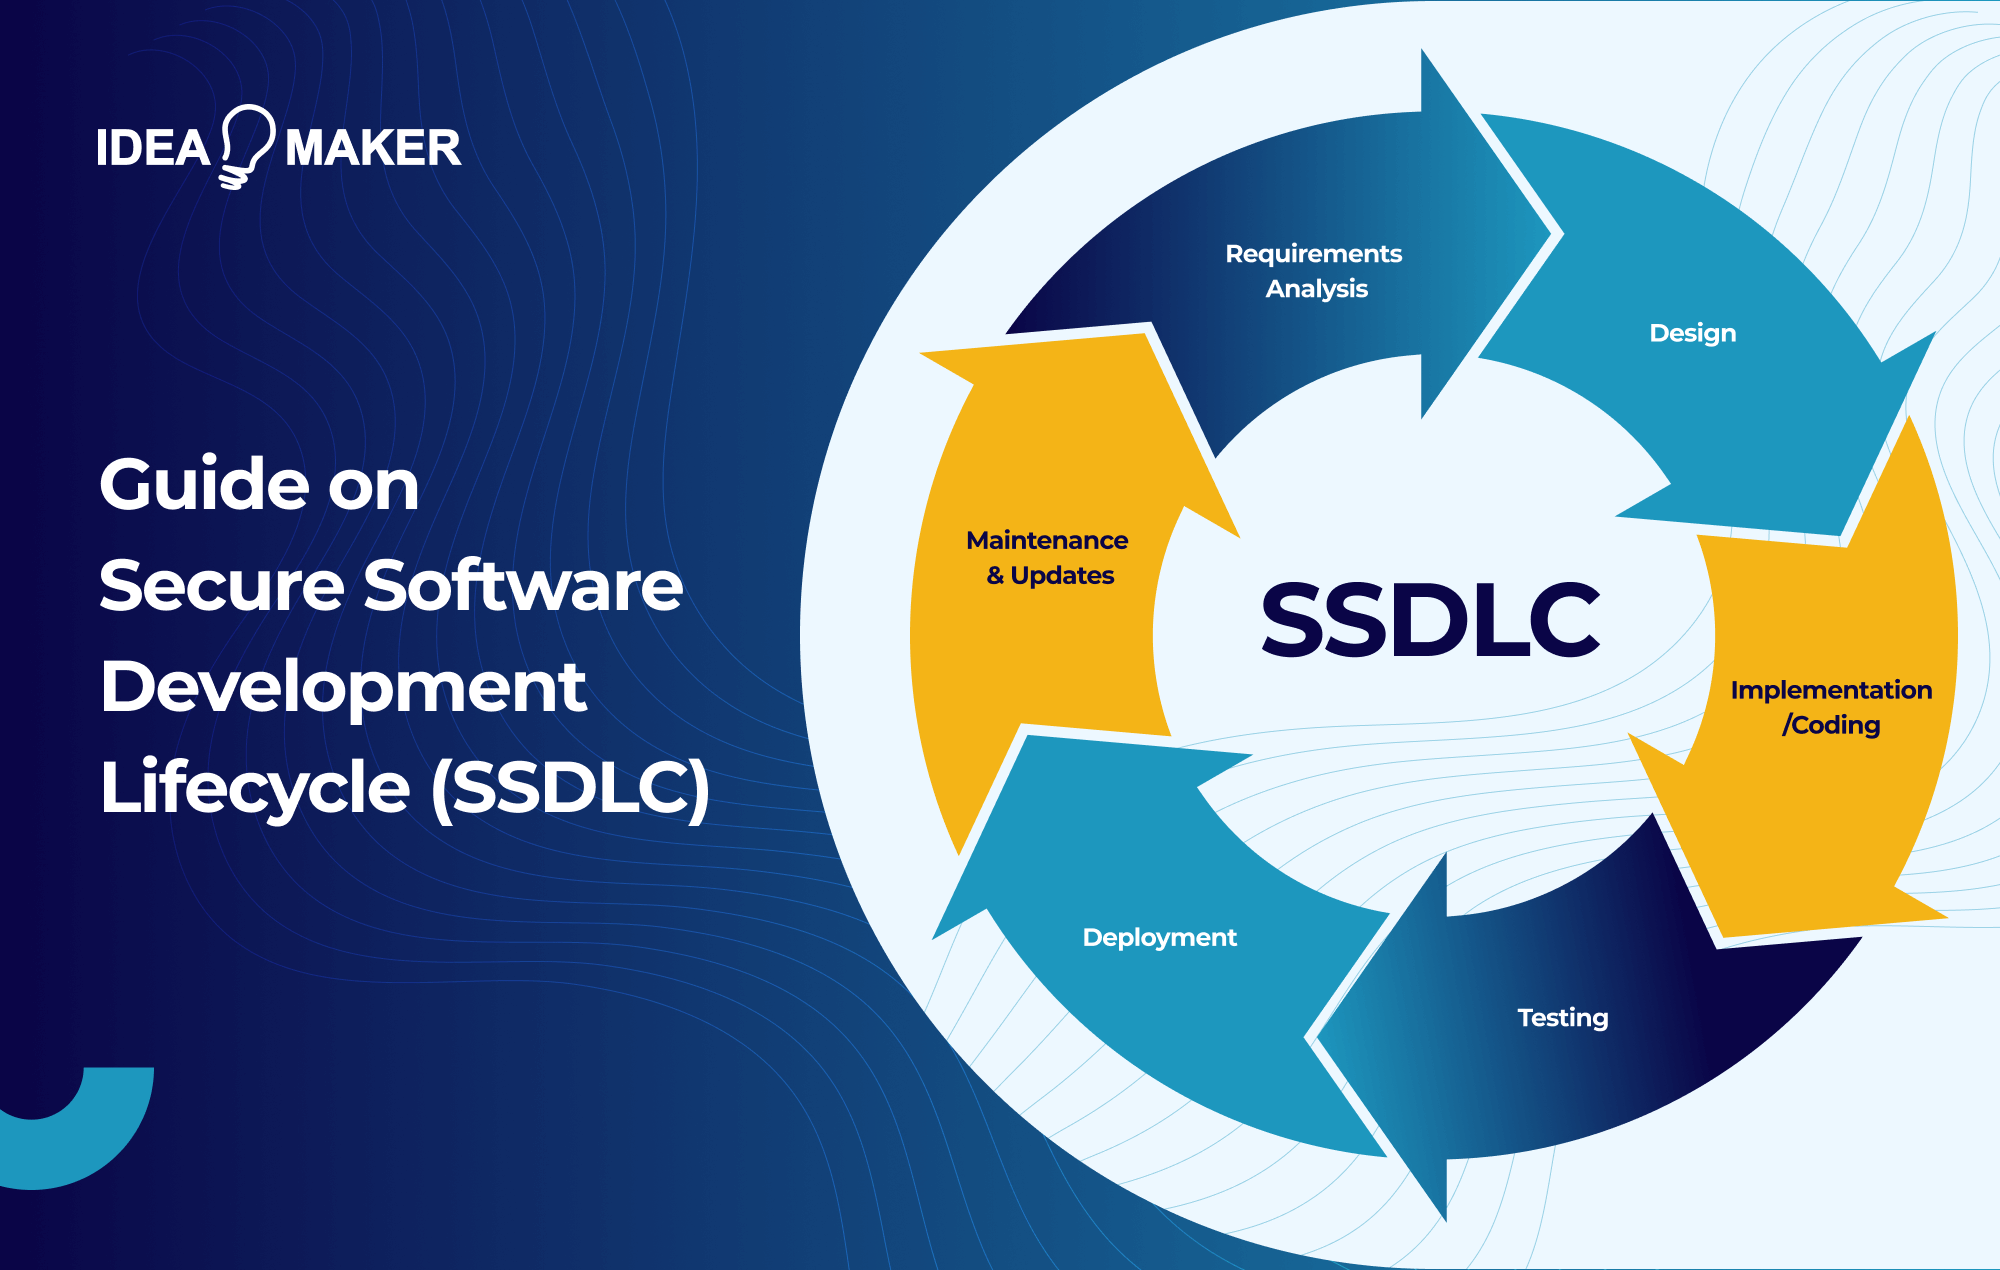 Ideamaker - Guide on Secure Software Development Lifecycle (SSDLC)